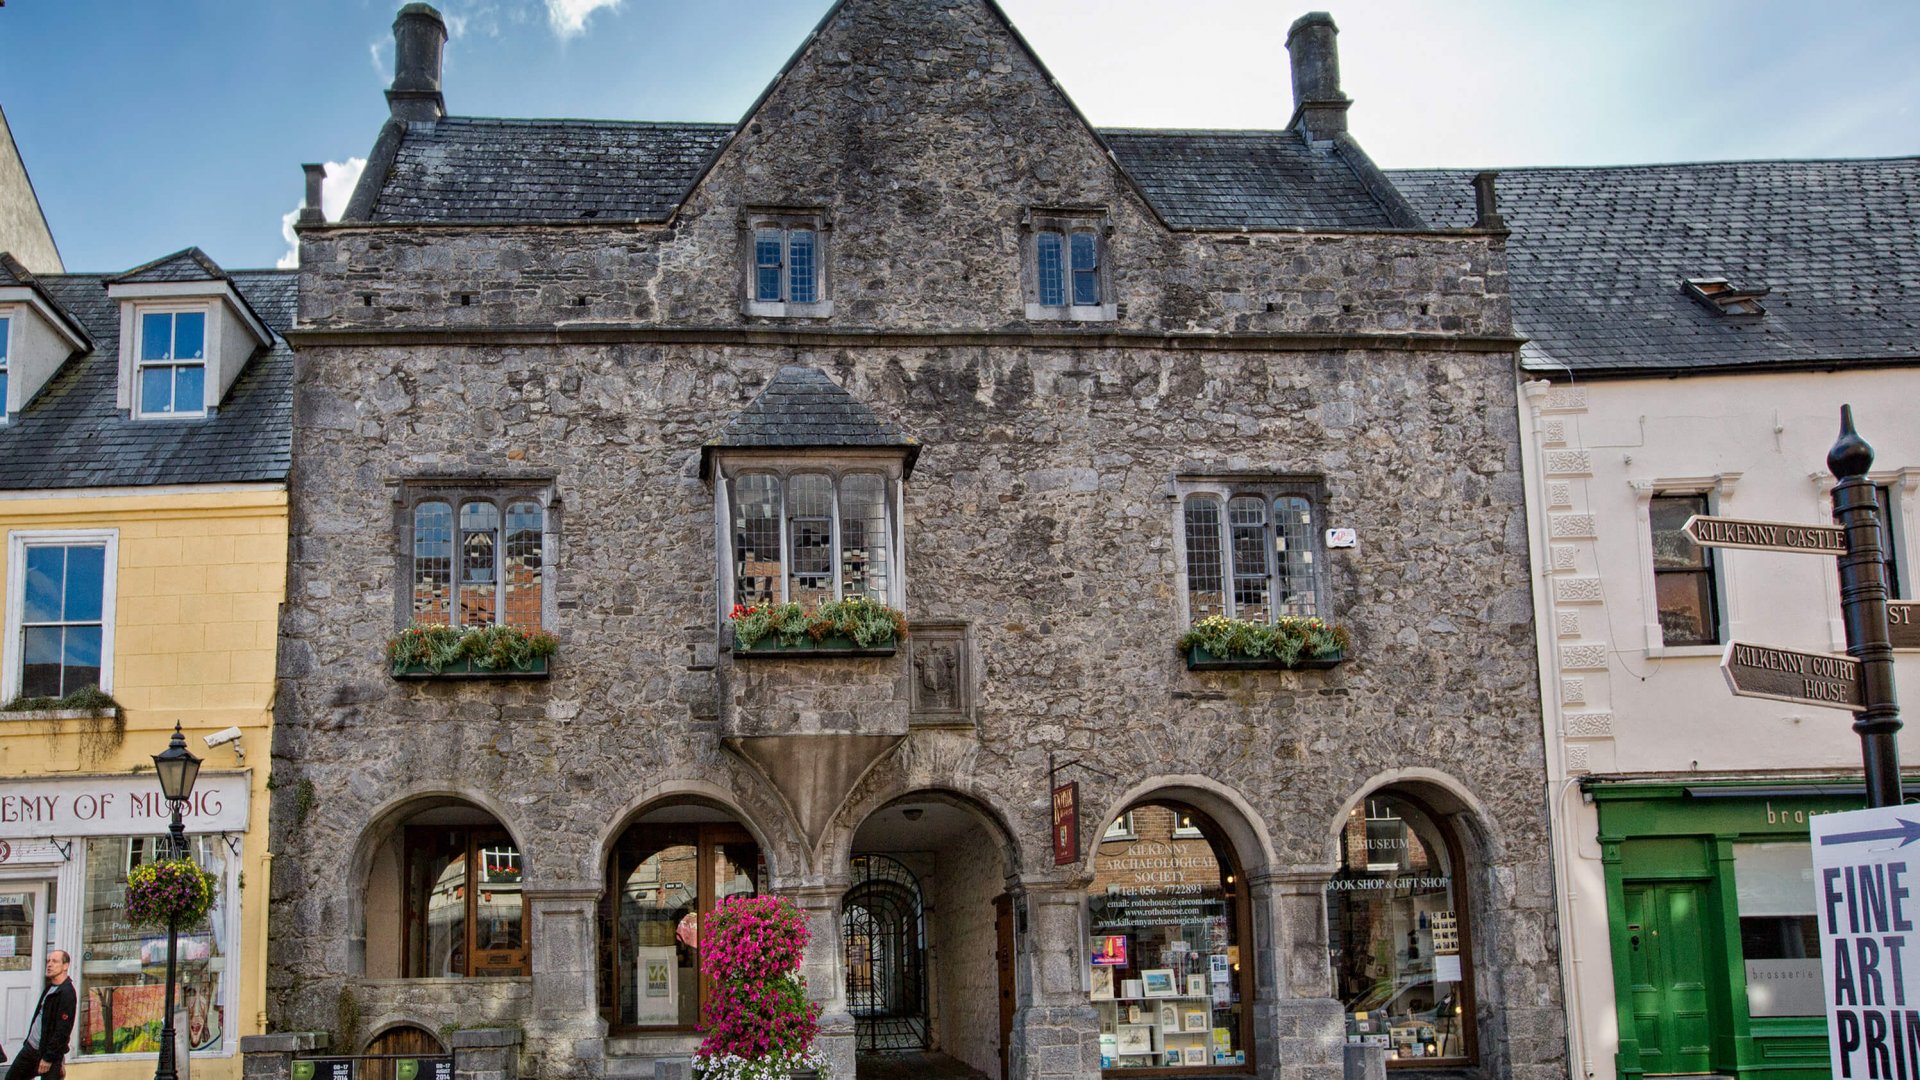 Facade of medieval Rothe House in Kilkenny